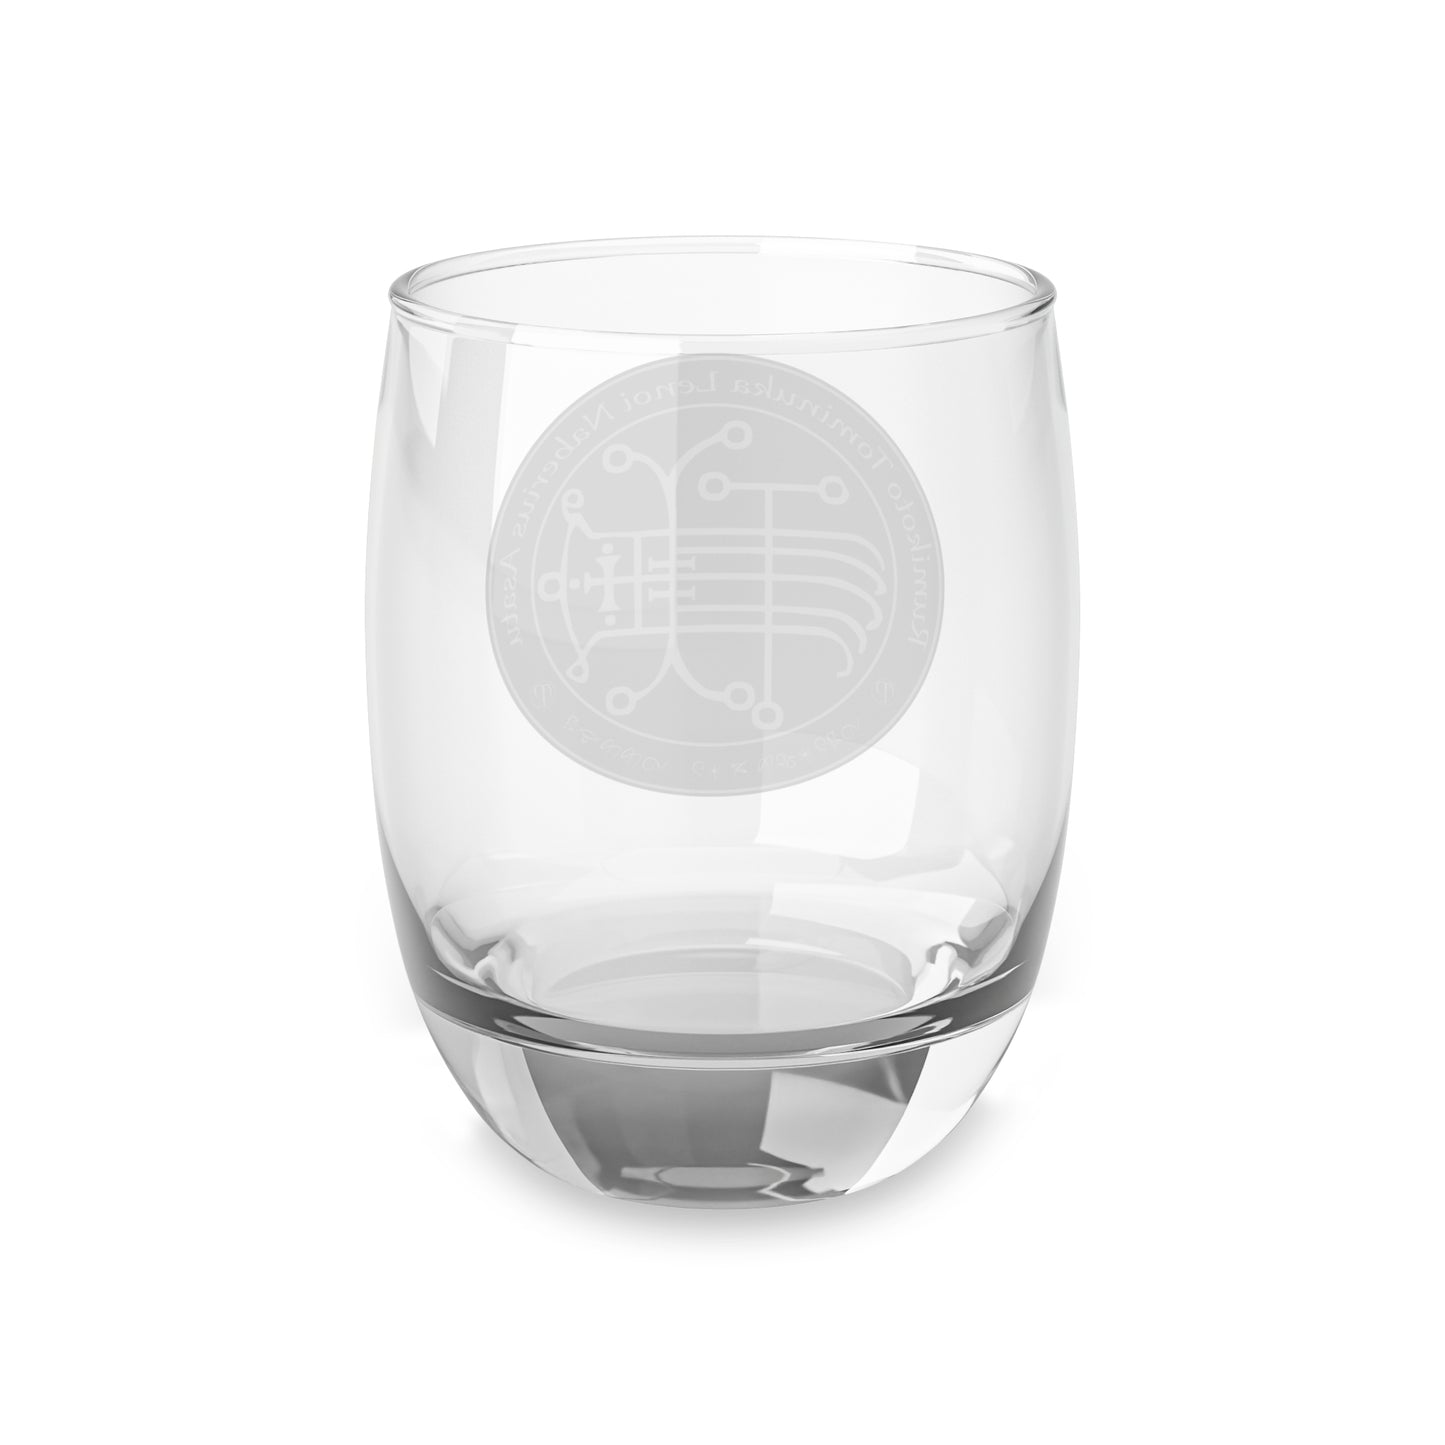 Naberius Sigil Engraved Crystal Offering Glass